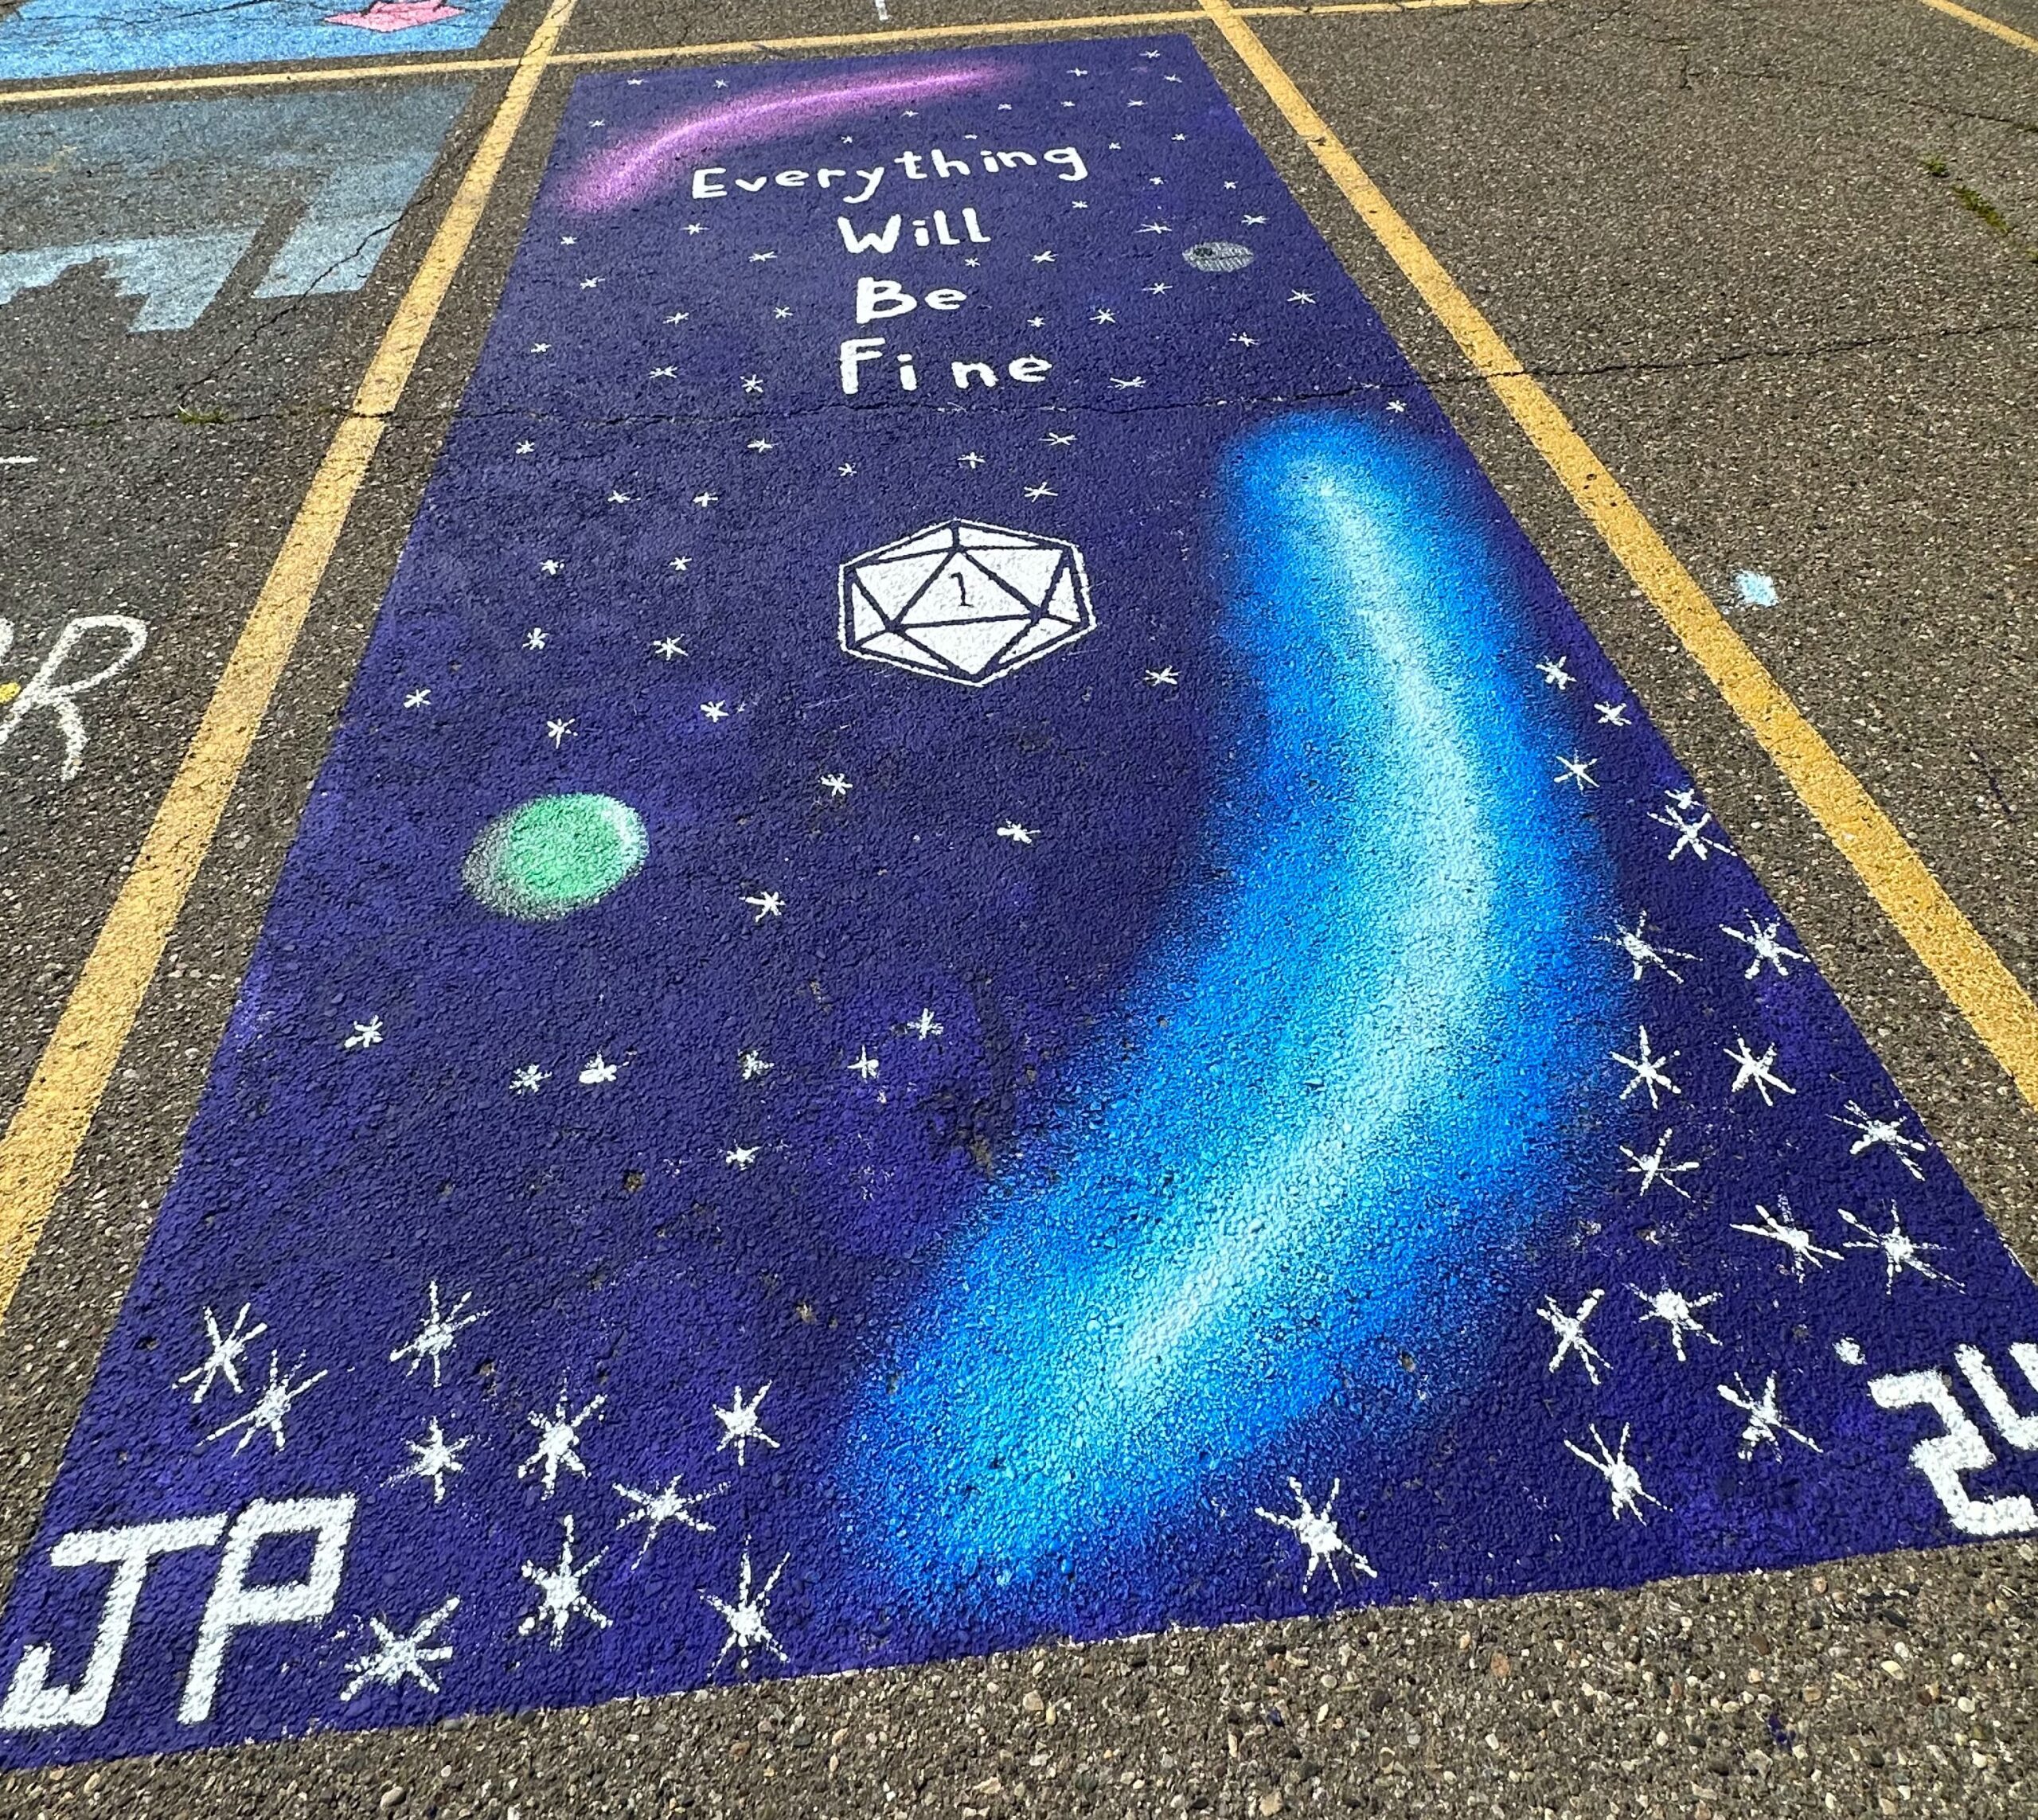 One of the more colorful pieces of parking space art